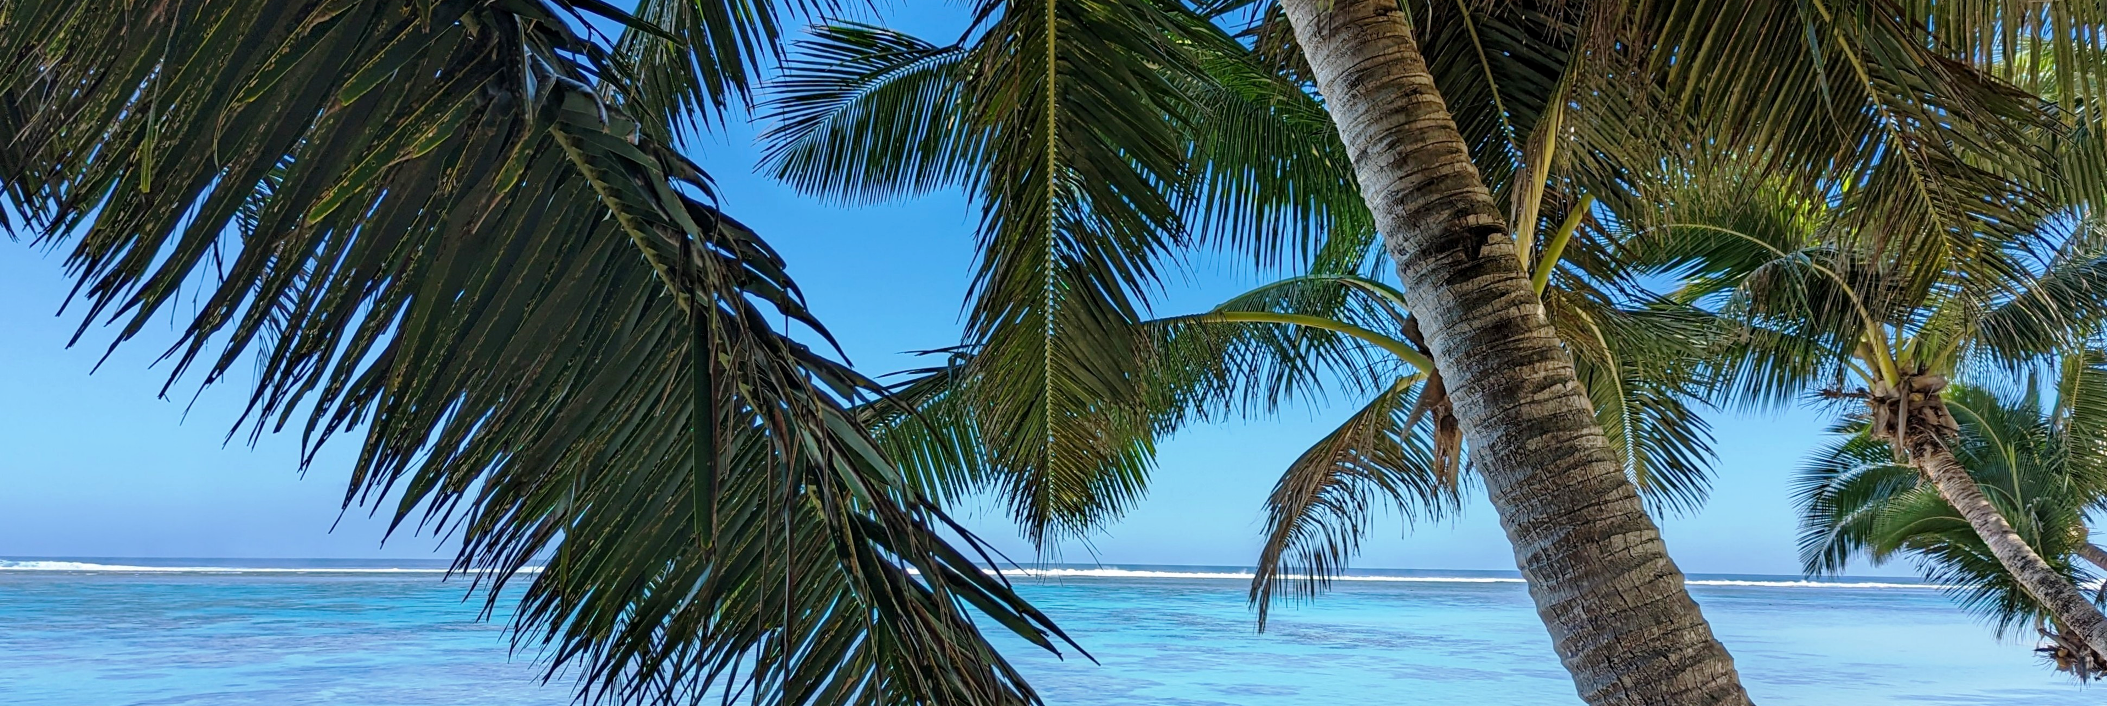 cook islands palm trees